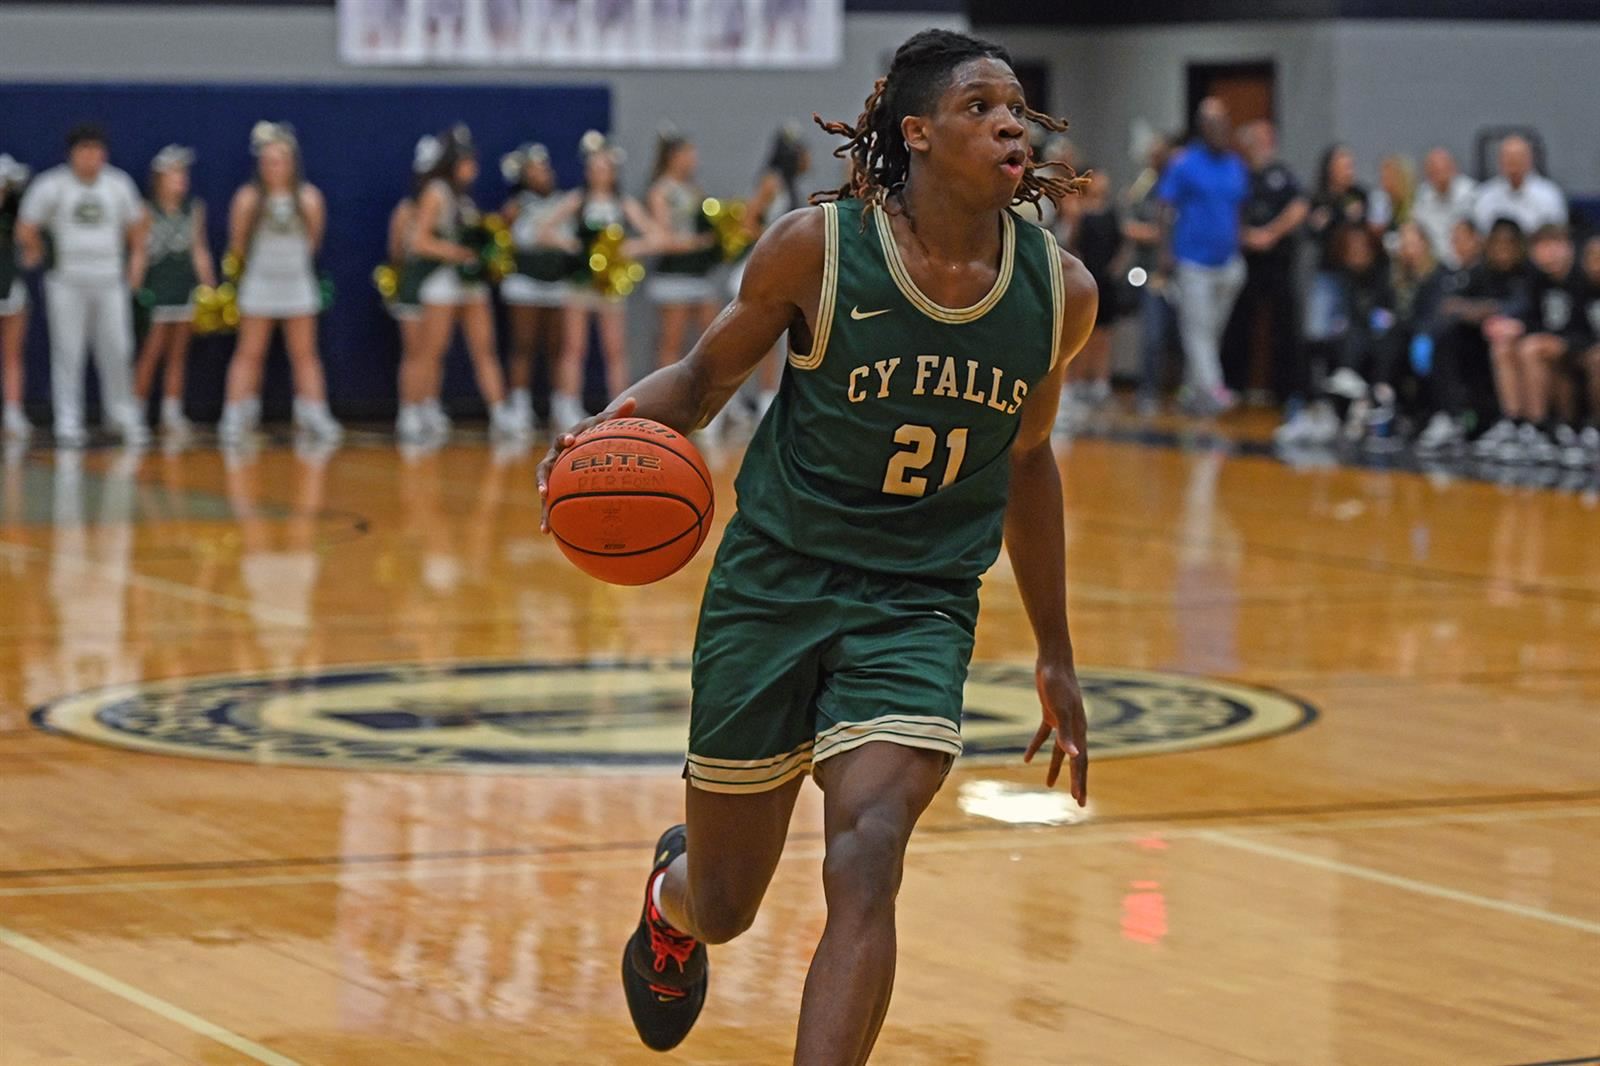 Cypress Falls High School senior Joseph Tugler was named the District 16-6A boys’ basketball Most Valuable Player.